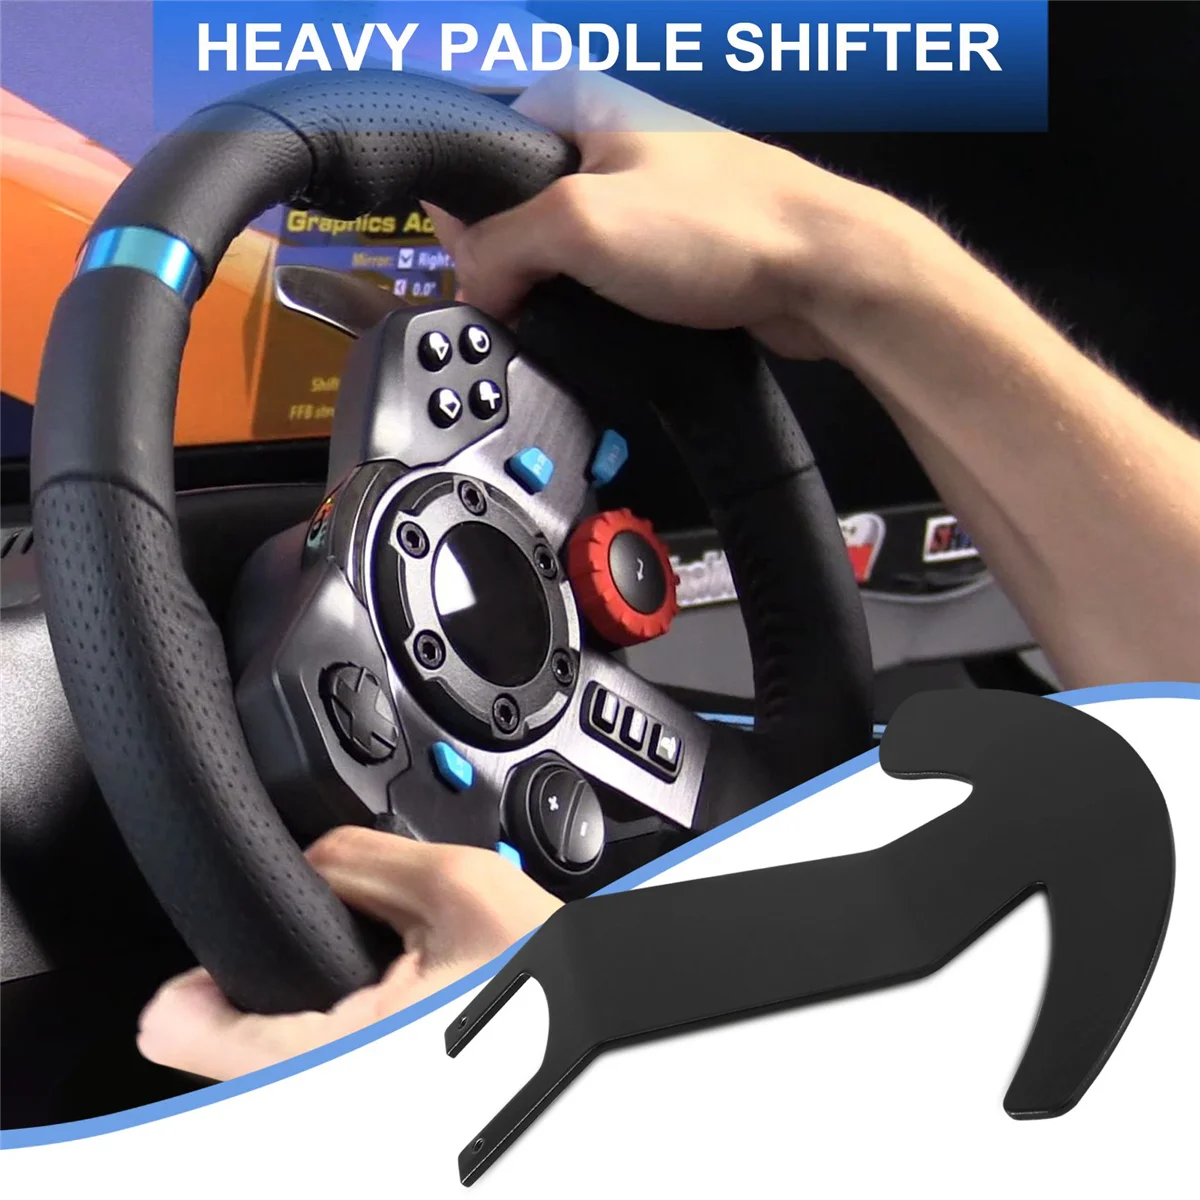 For Logitech G25 G27 Heavy Duty Paddle Shifters Racing Car Game  Modification Wheel Upgrade Fits 13-14 Flat Steering Wheel - Accessories -  AliExpress